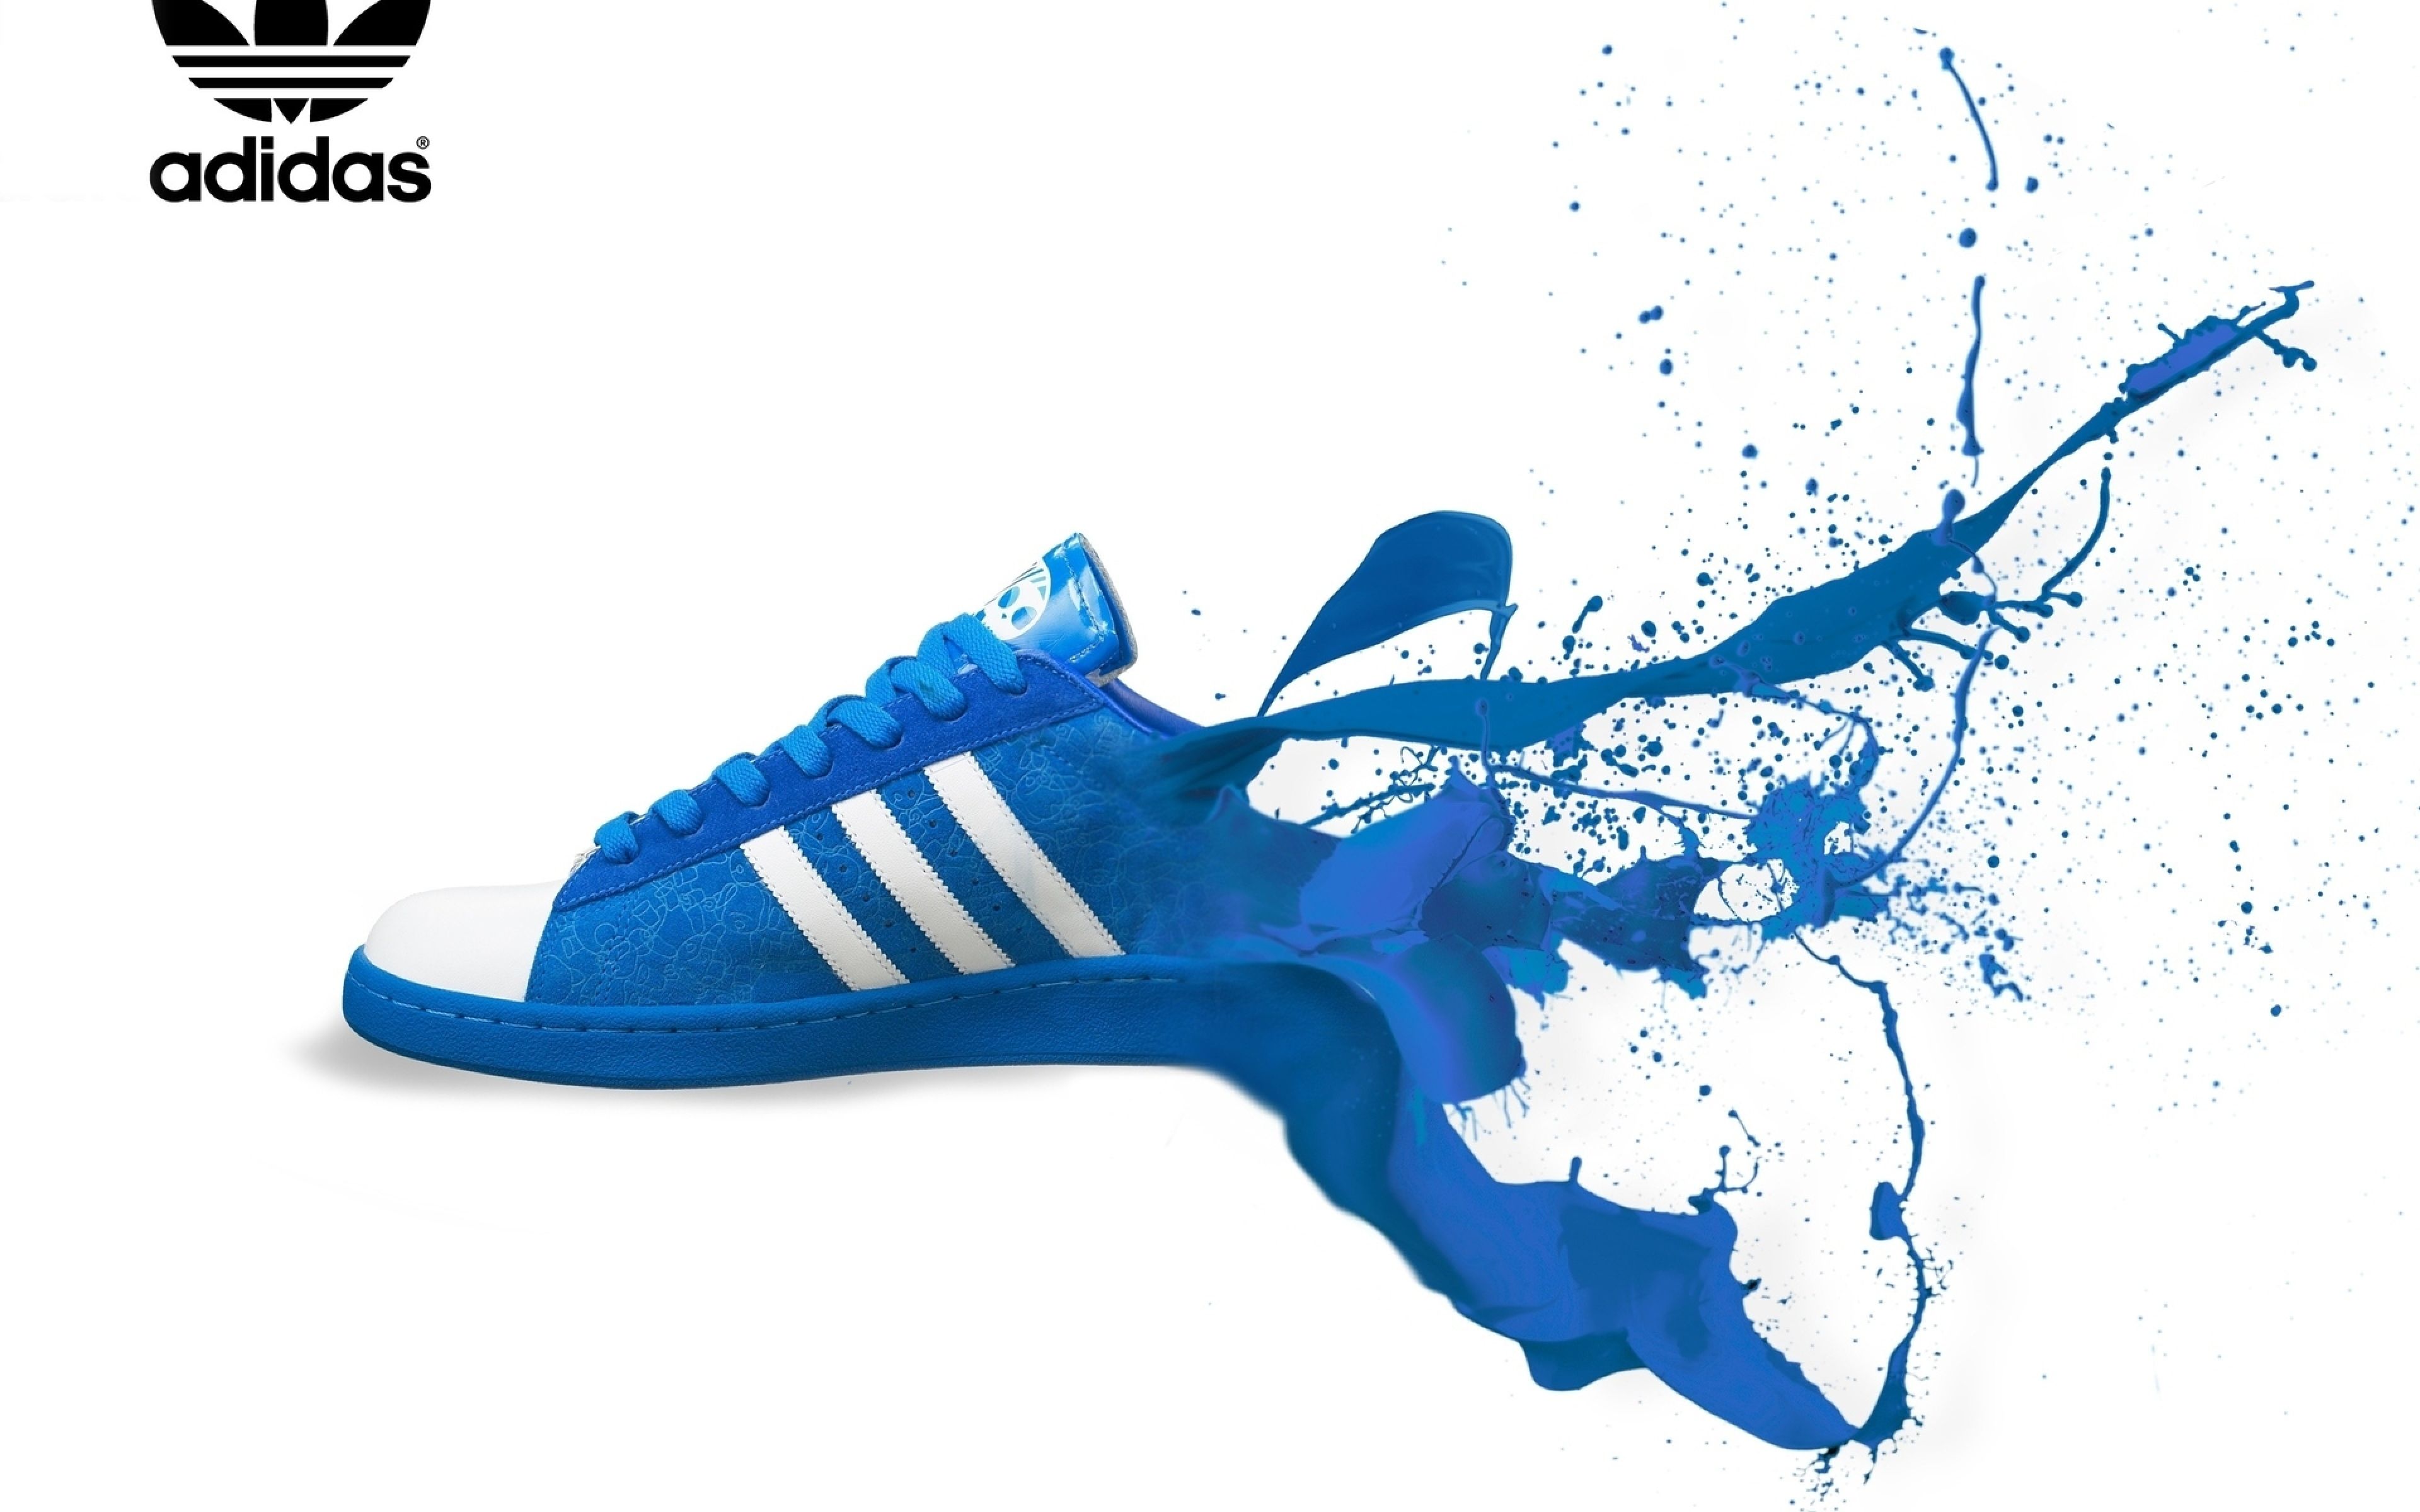 Download Wallpaper 3840x2400 Adidas, Shoes, Sneakers, Sport, Brand ...